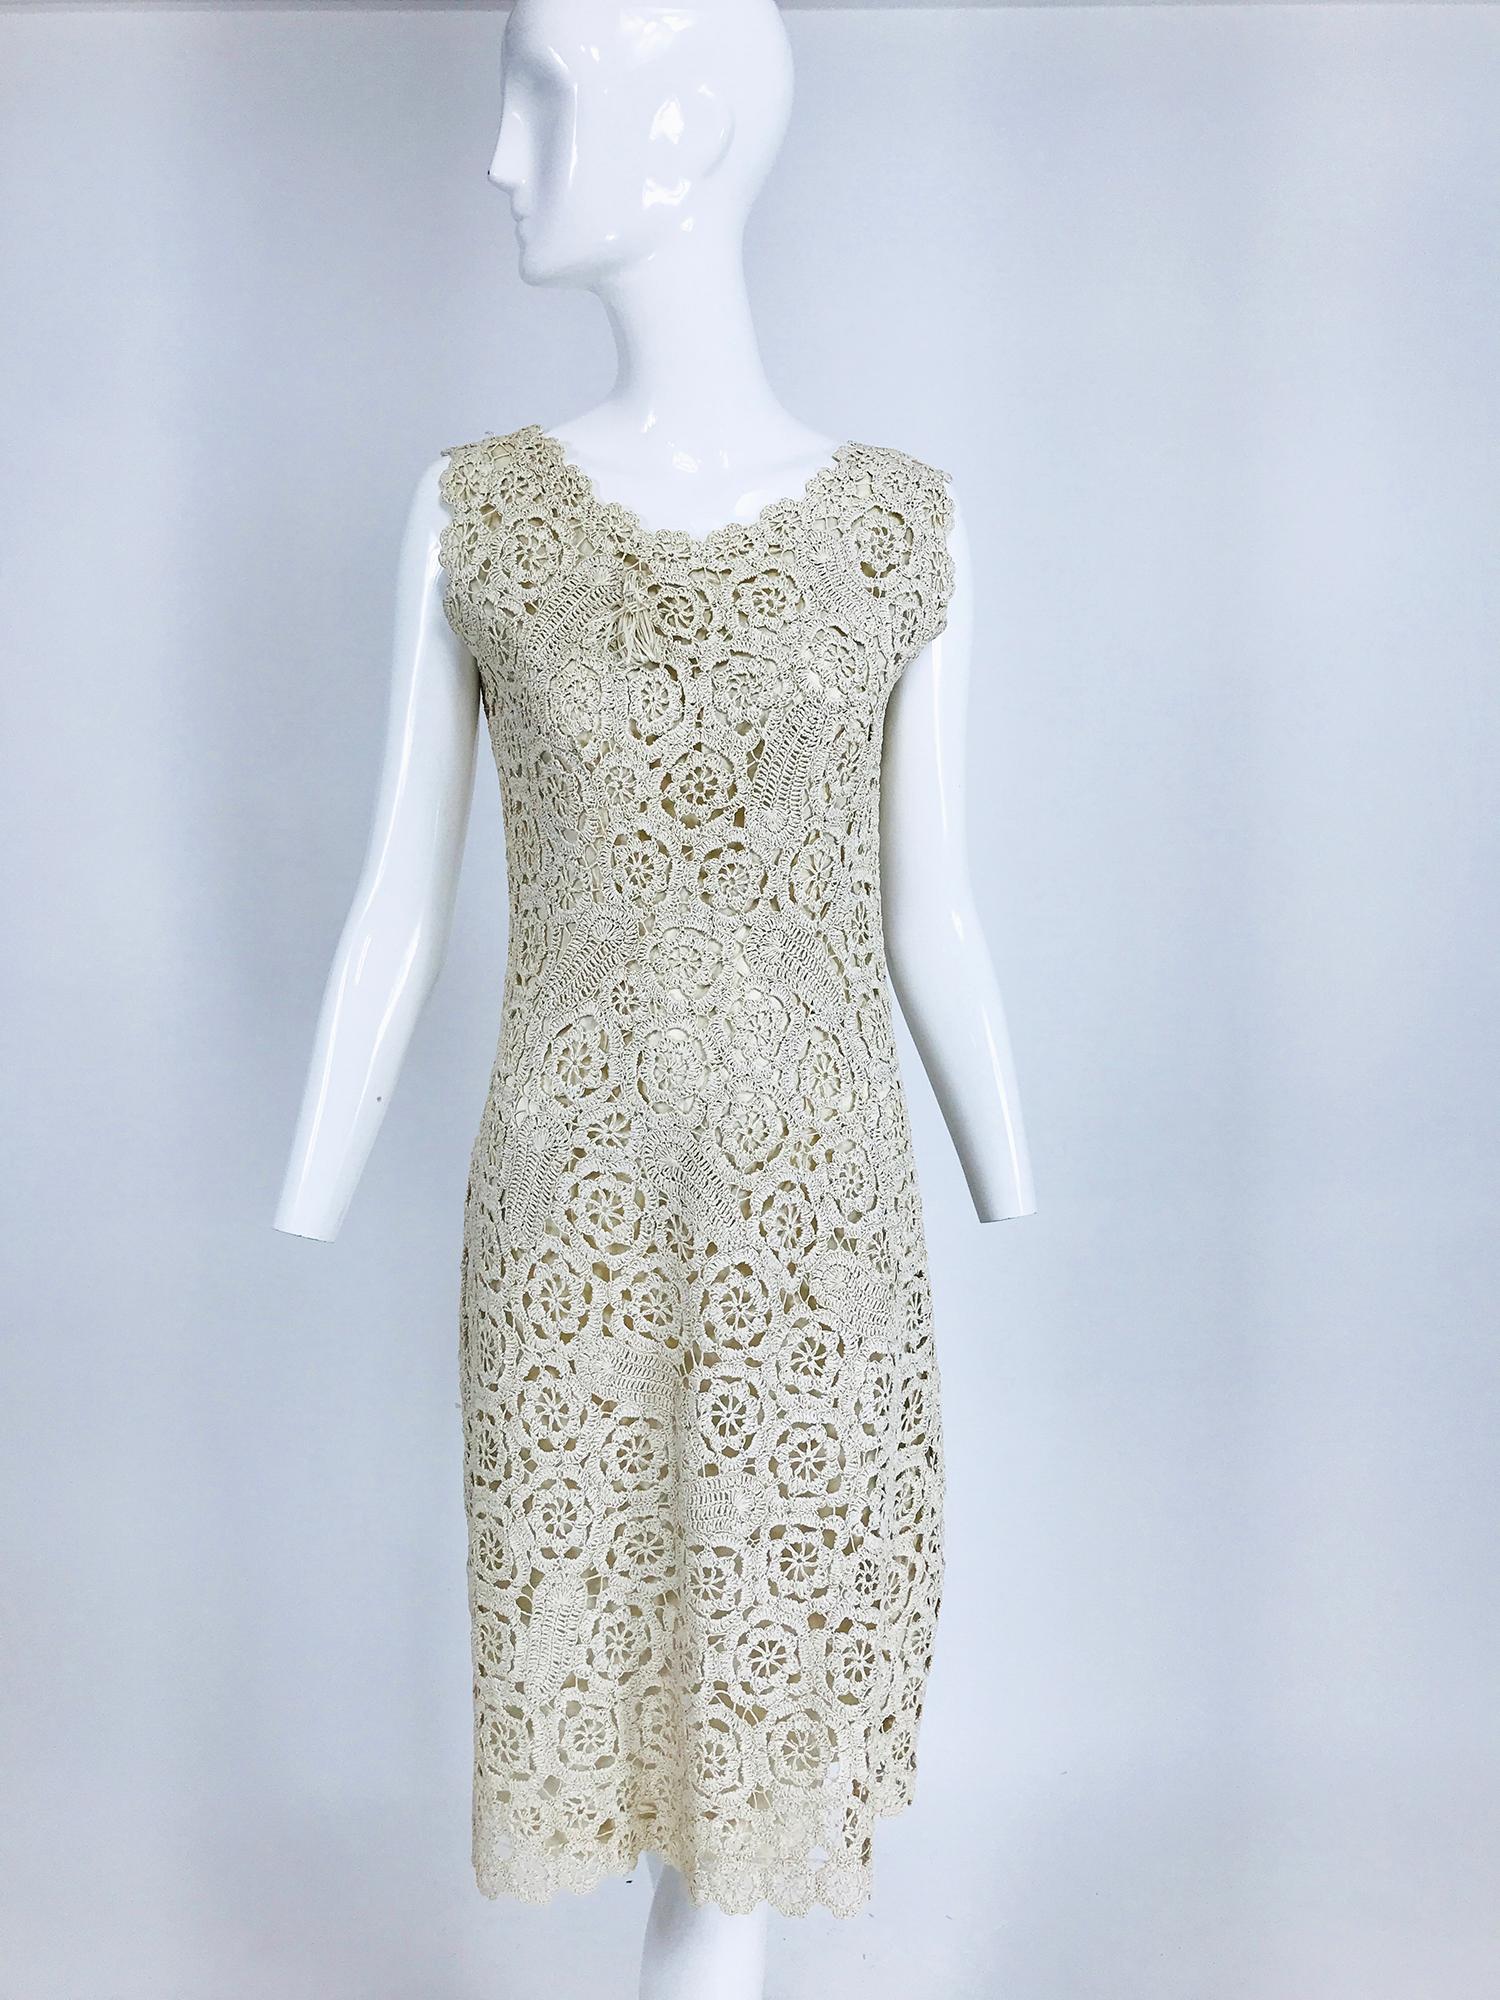 Creazioni Paoli of Firenze swing coat and sheath dress set of cream crocheted raffia from the 1950s. This set has the original tag and appears to be unworn. The dress is a simple fitted sheath dress, the crochet is perfectly placed and matched, the